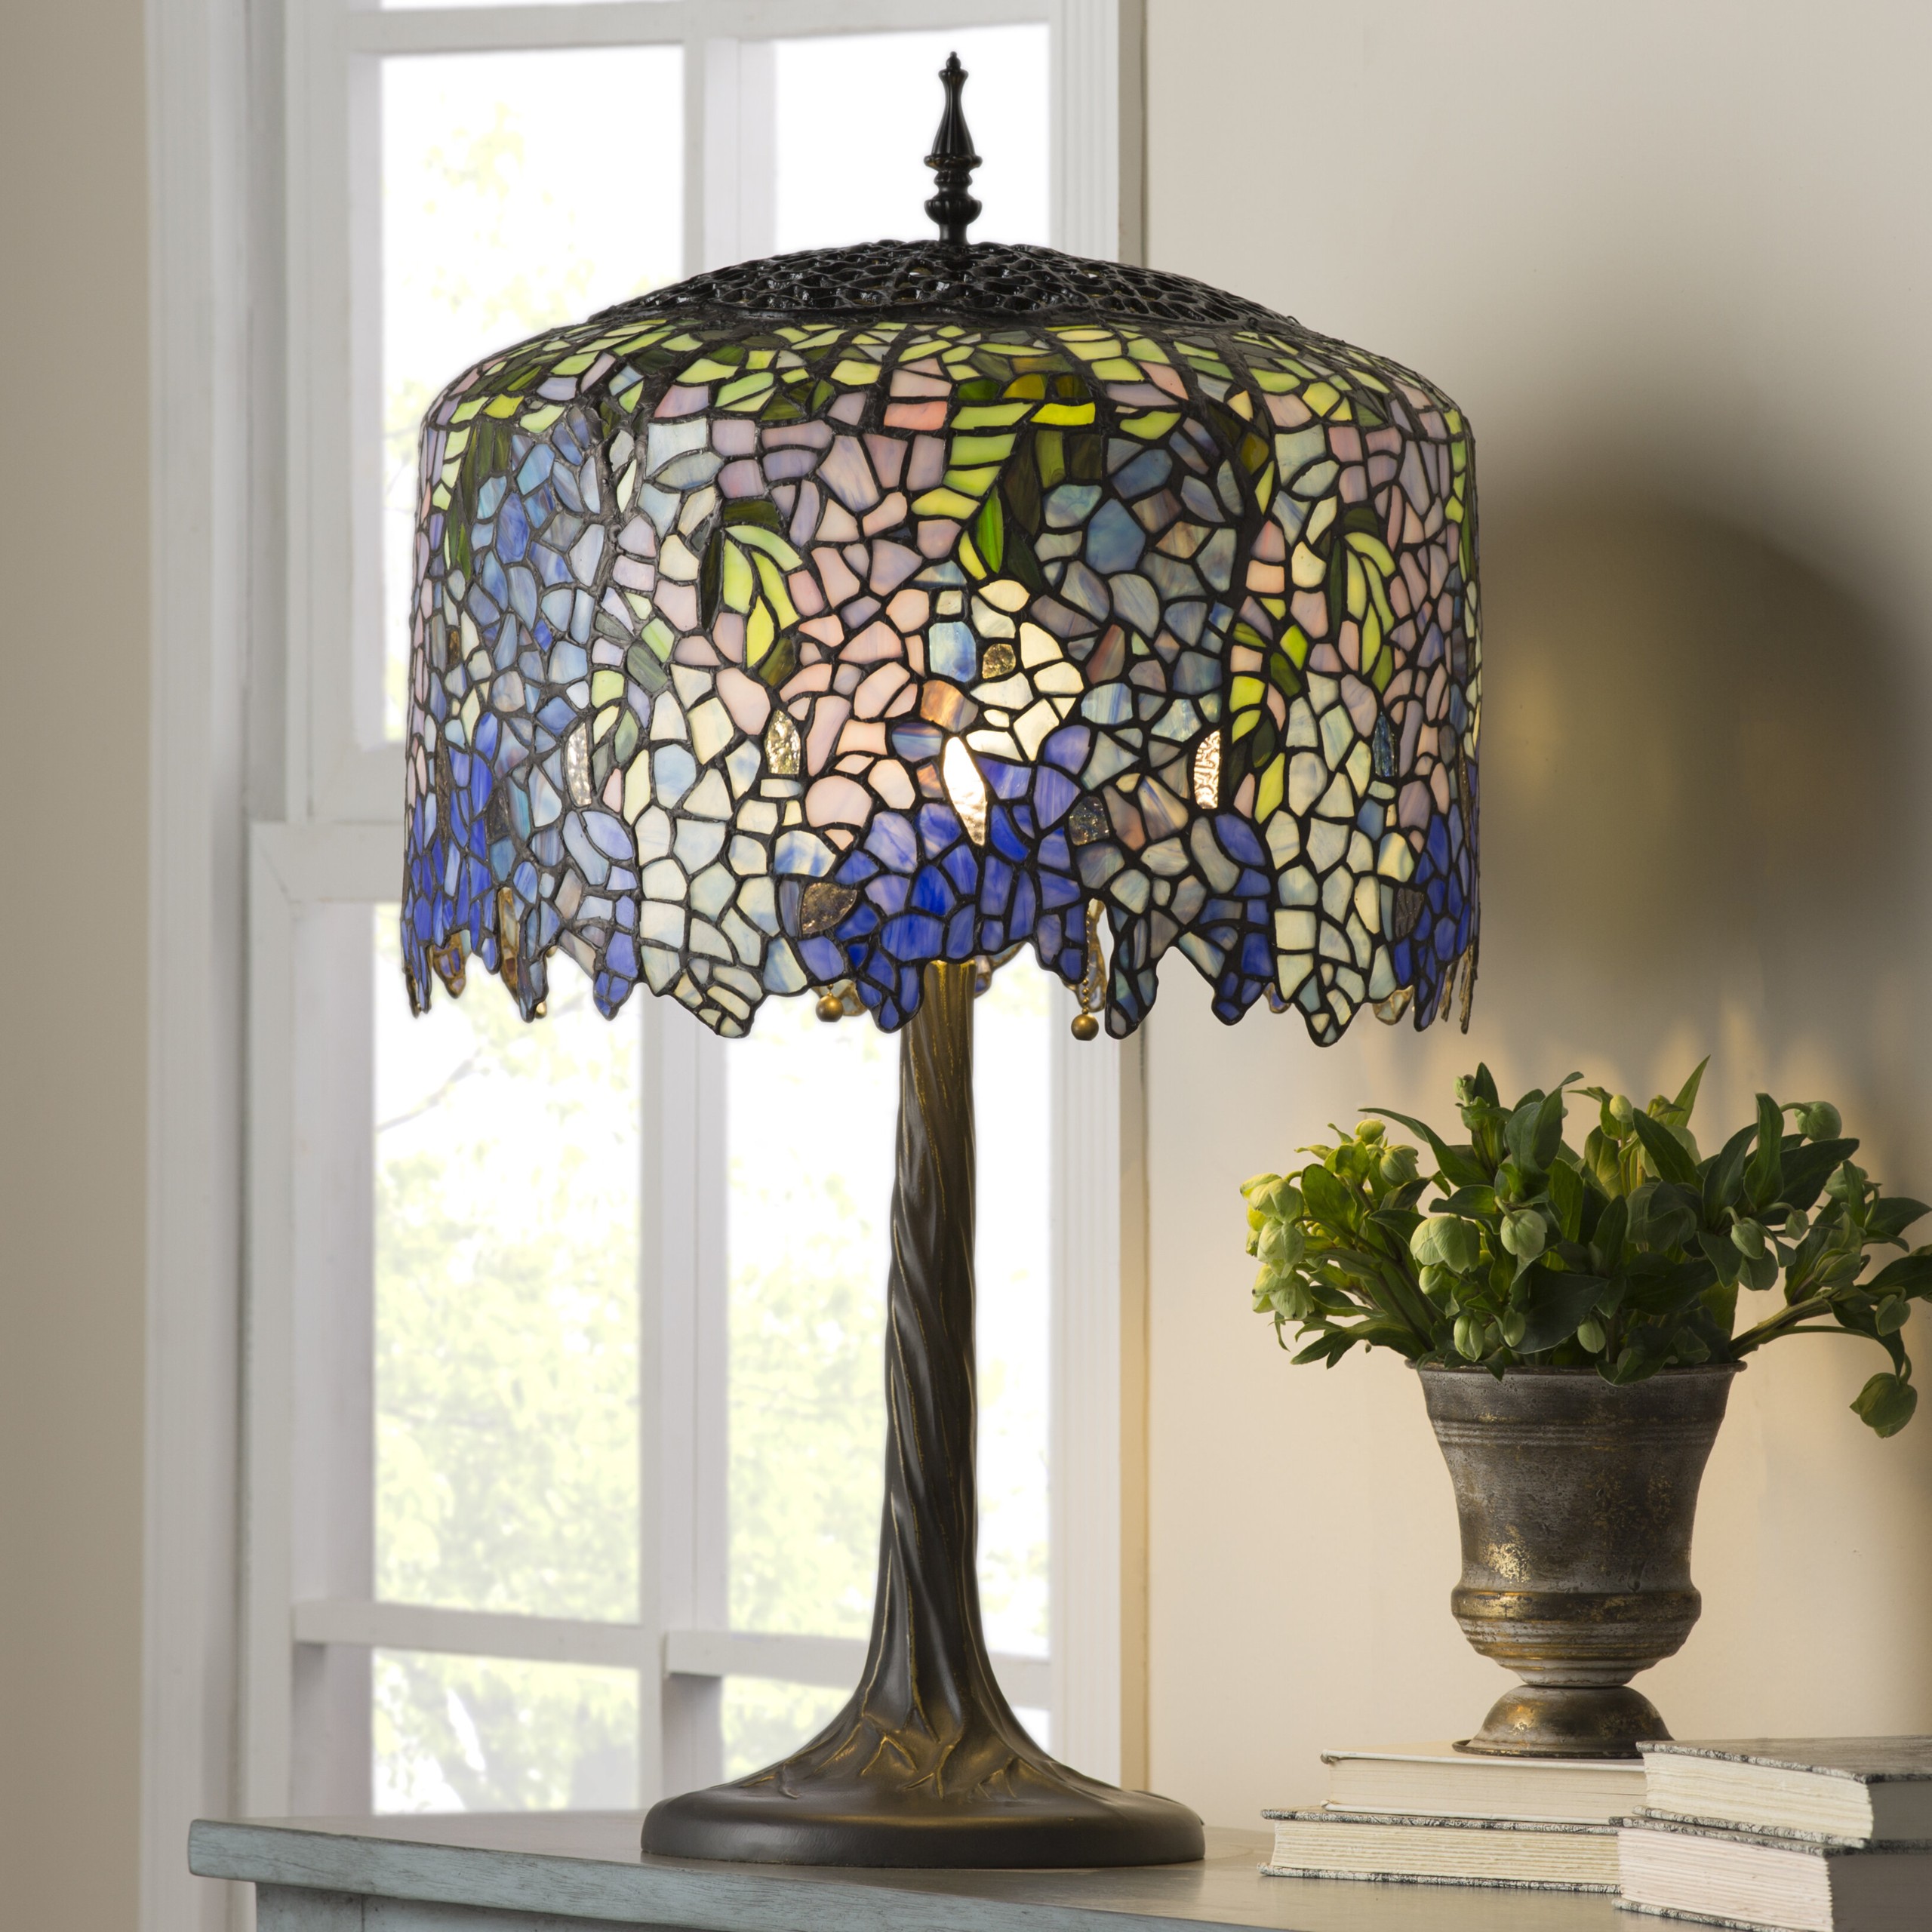 Crannell Tiffany Inspired Grand Wisteria Stained Glass 29.50" Table Lamp